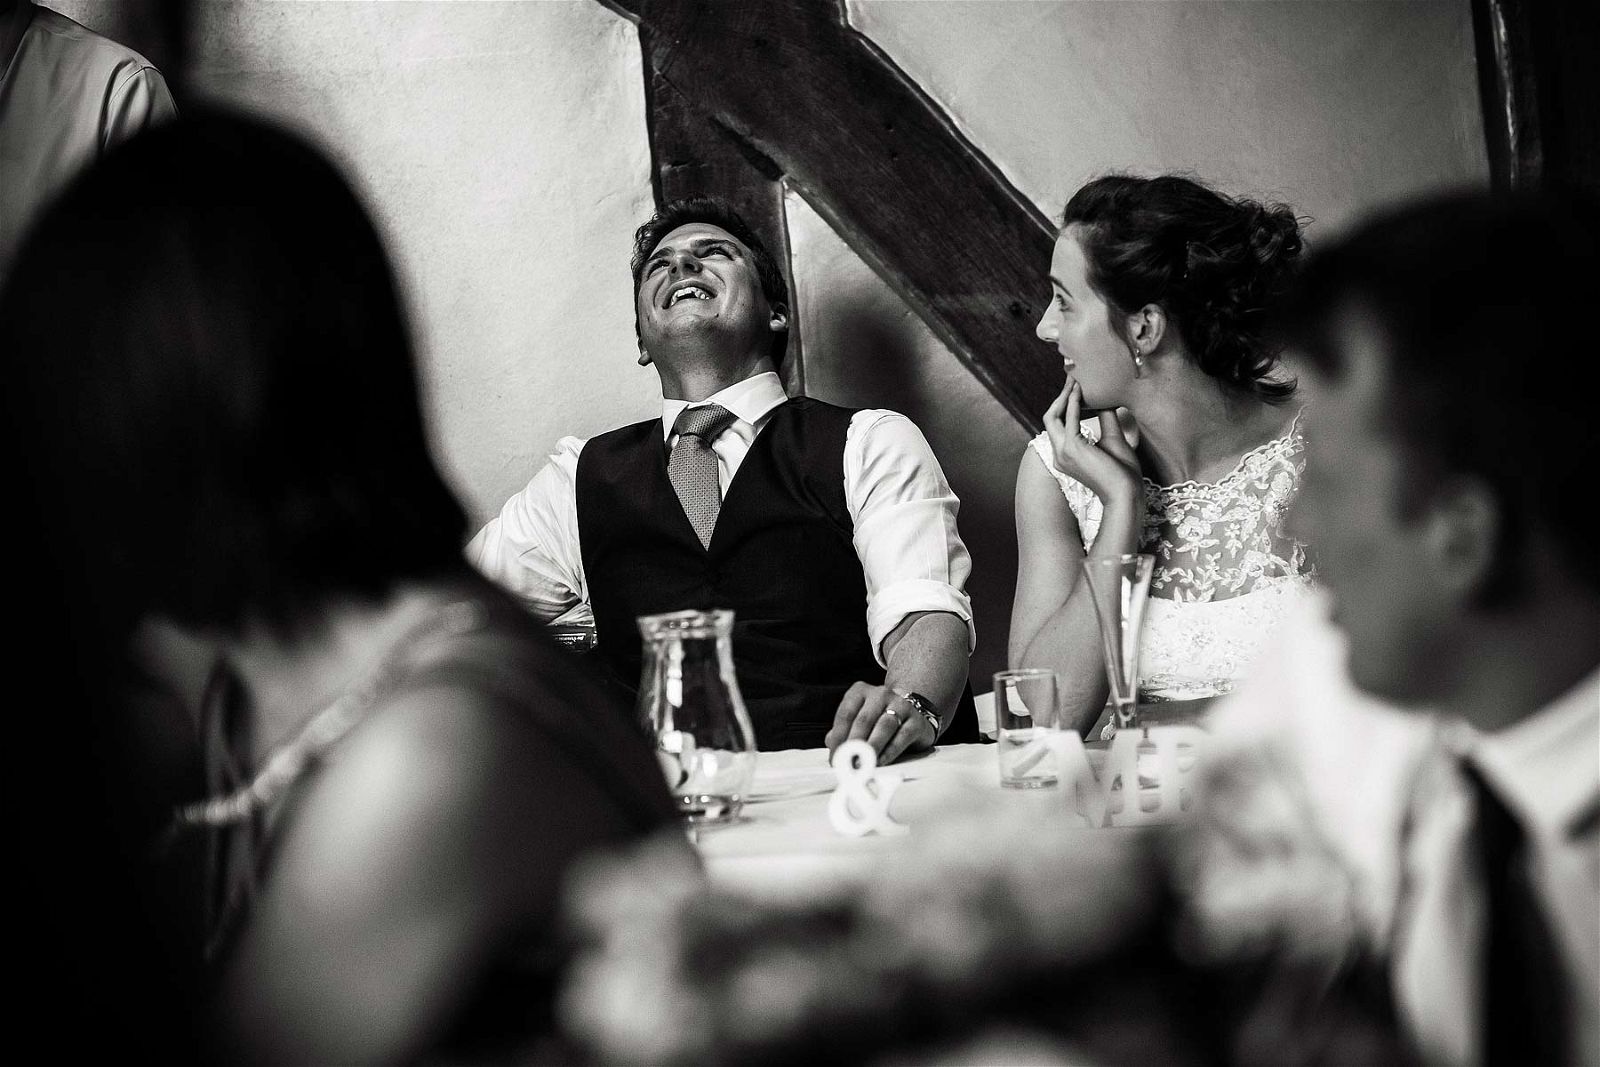 Wedding photos that capture the fun, emotion and excitement of the wedding breakfast and the fabulous speeches in the barn at Hundred House Hotel in Norton by Shropshire Documentary Wedding Photographer Stuart James